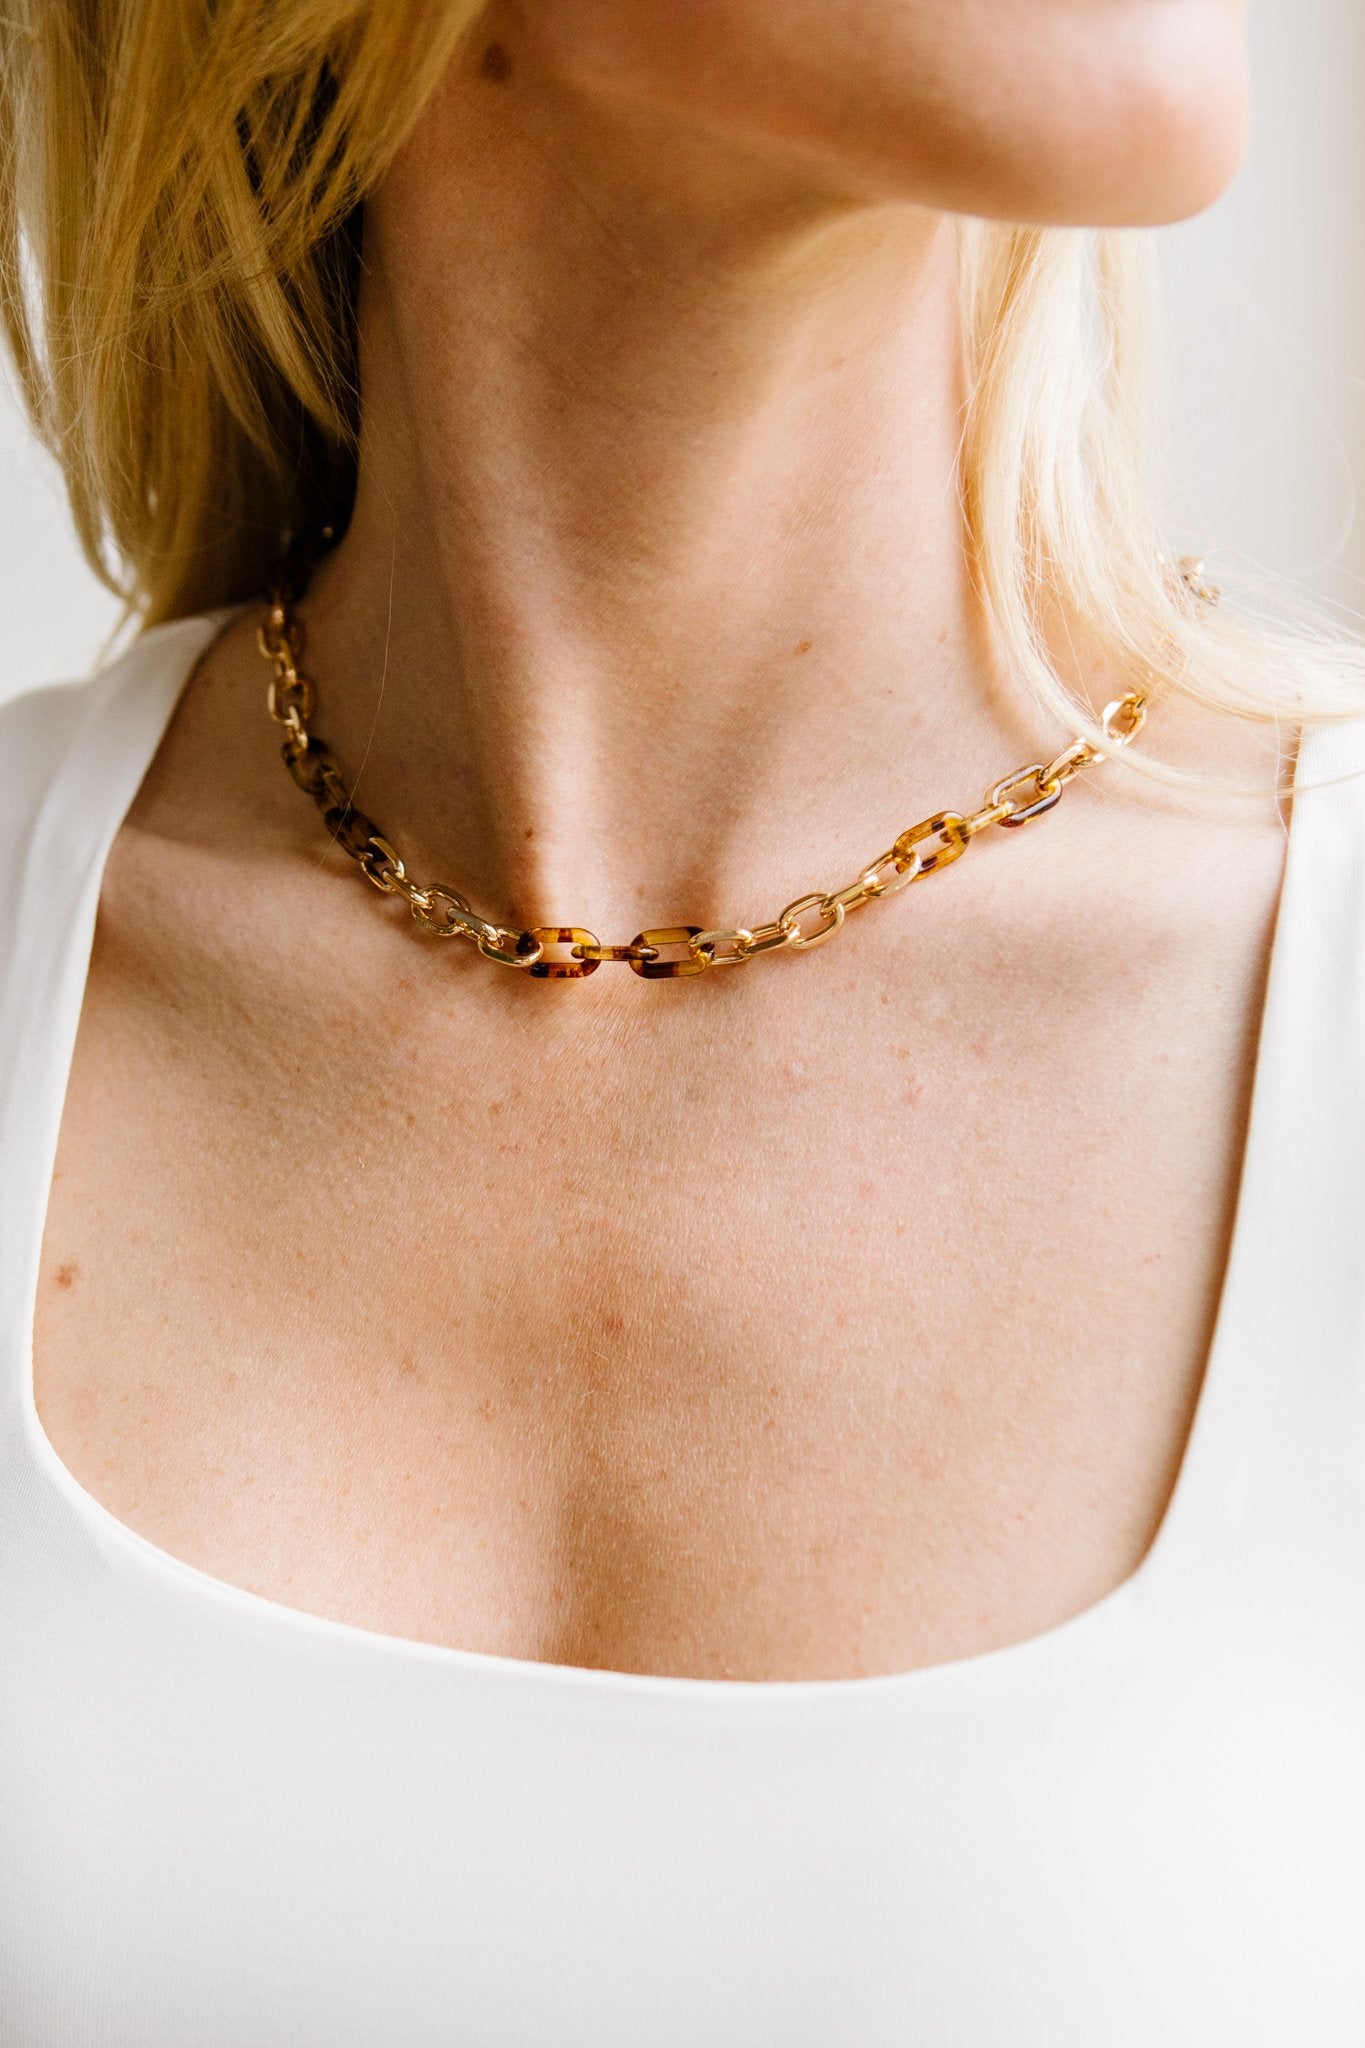 Gold & Tortoise Small Chain Necklace